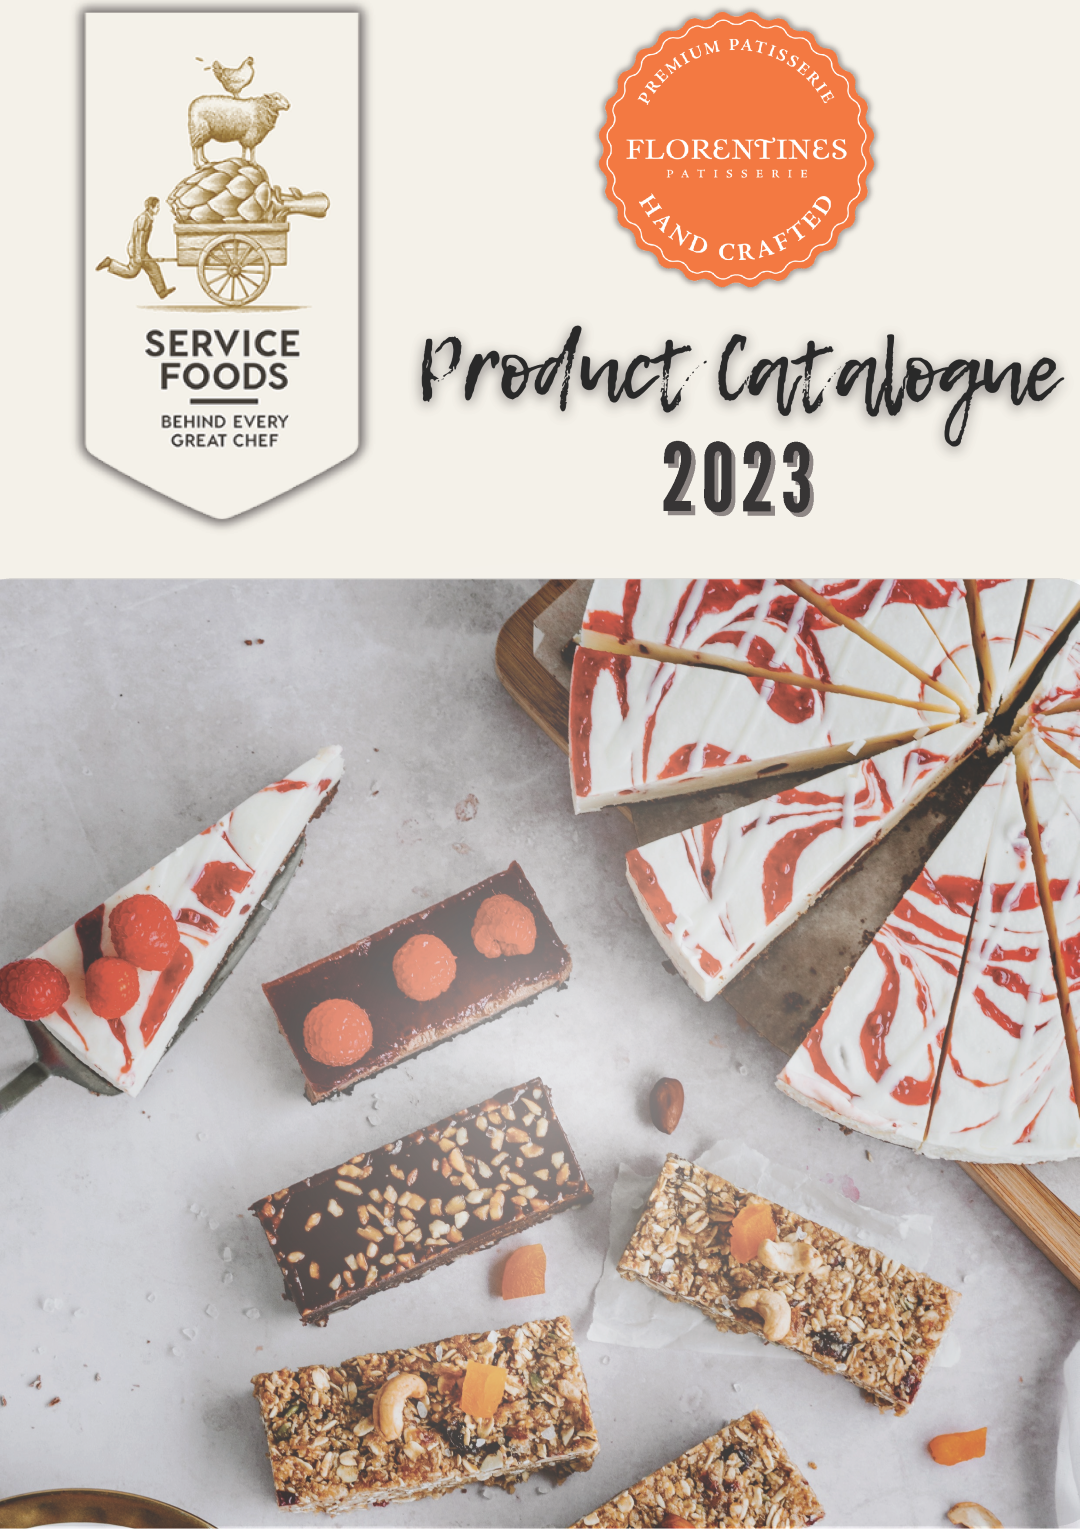 Service Foods Florentines Product Catalogue 2023